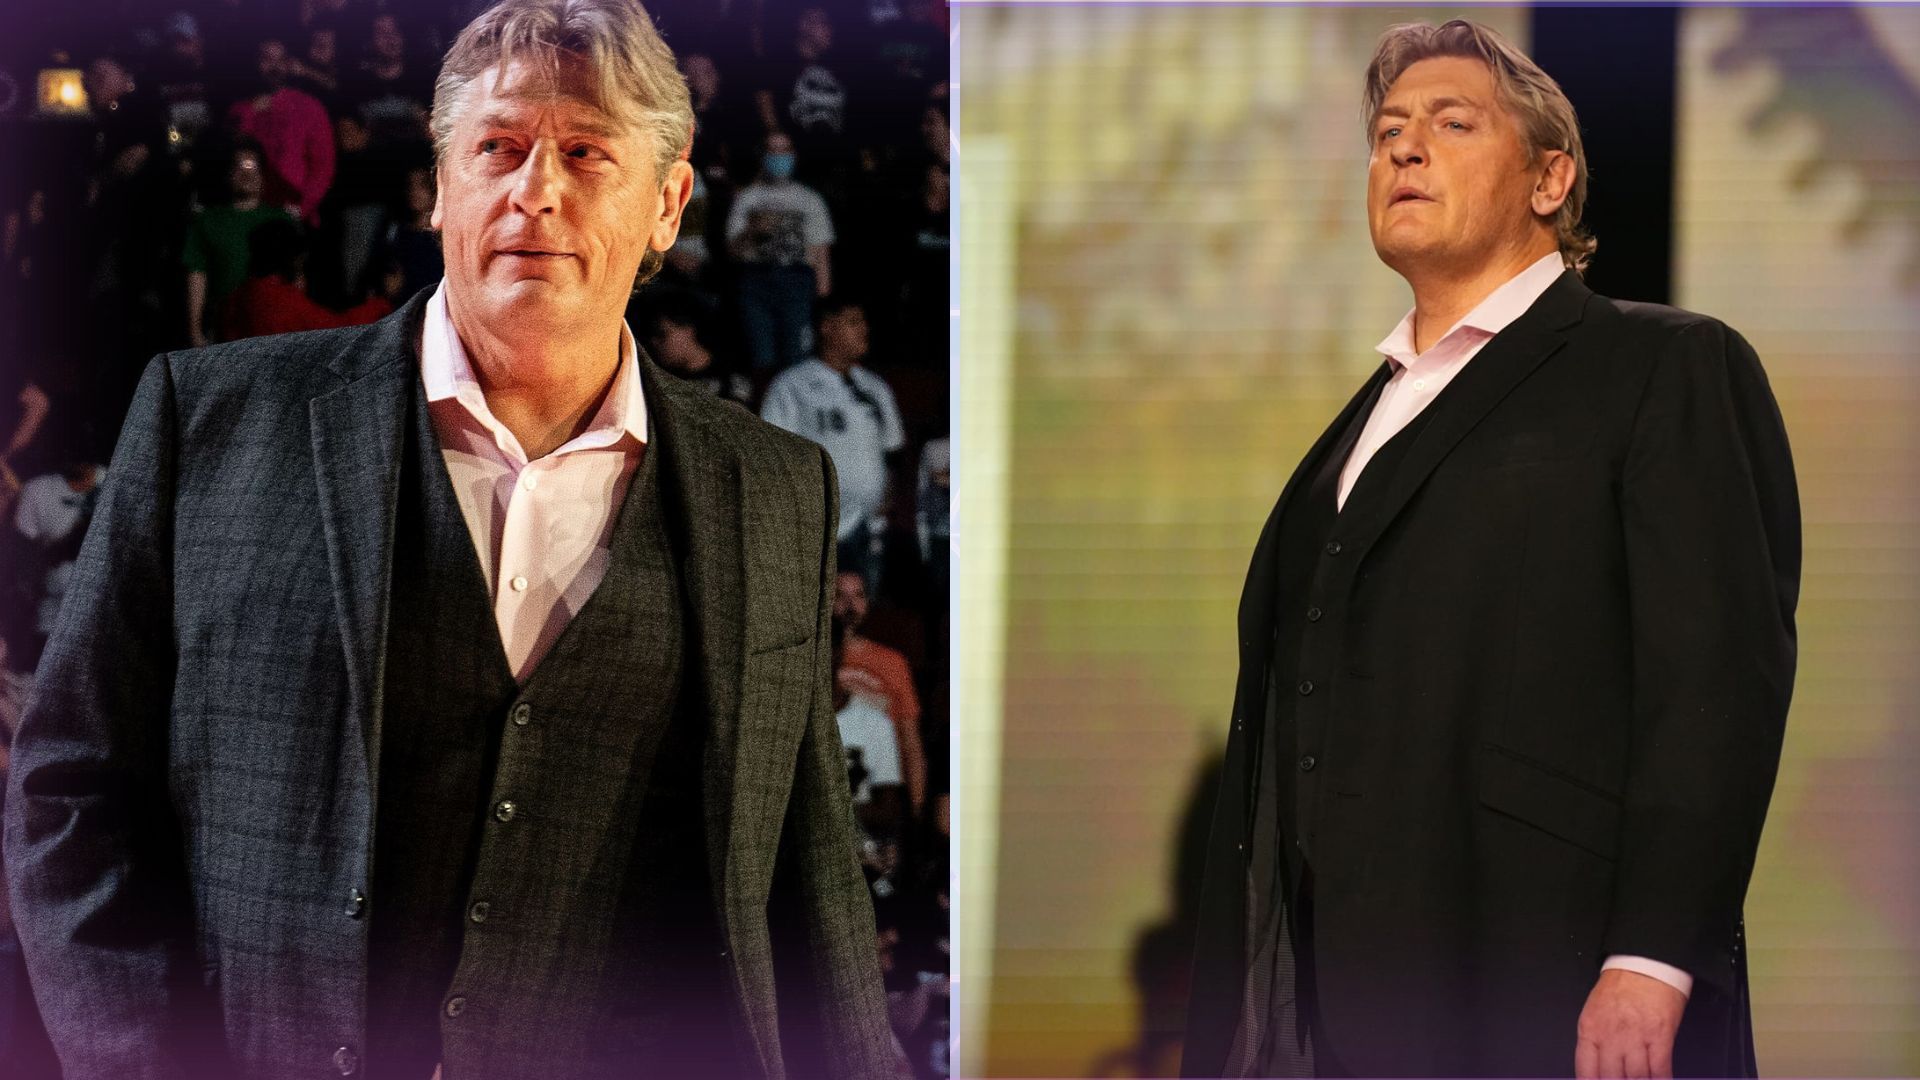 William Regal might be returning to WWE soon